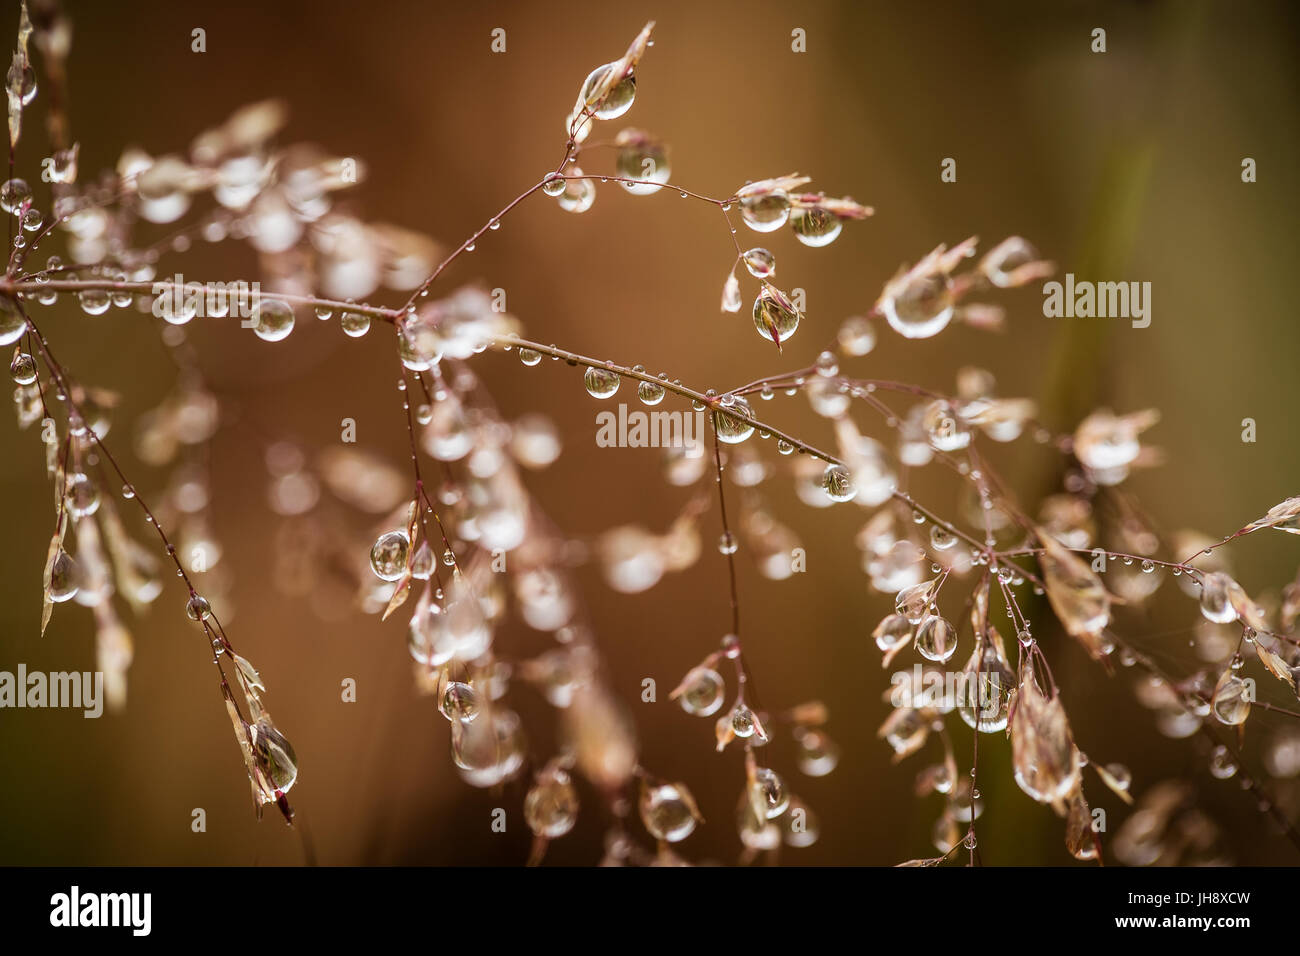 Beautiful closeup of a bent grass on a natural background after the rain with water droplets. Shallow depth of field closeup macro photo. Stock Photo